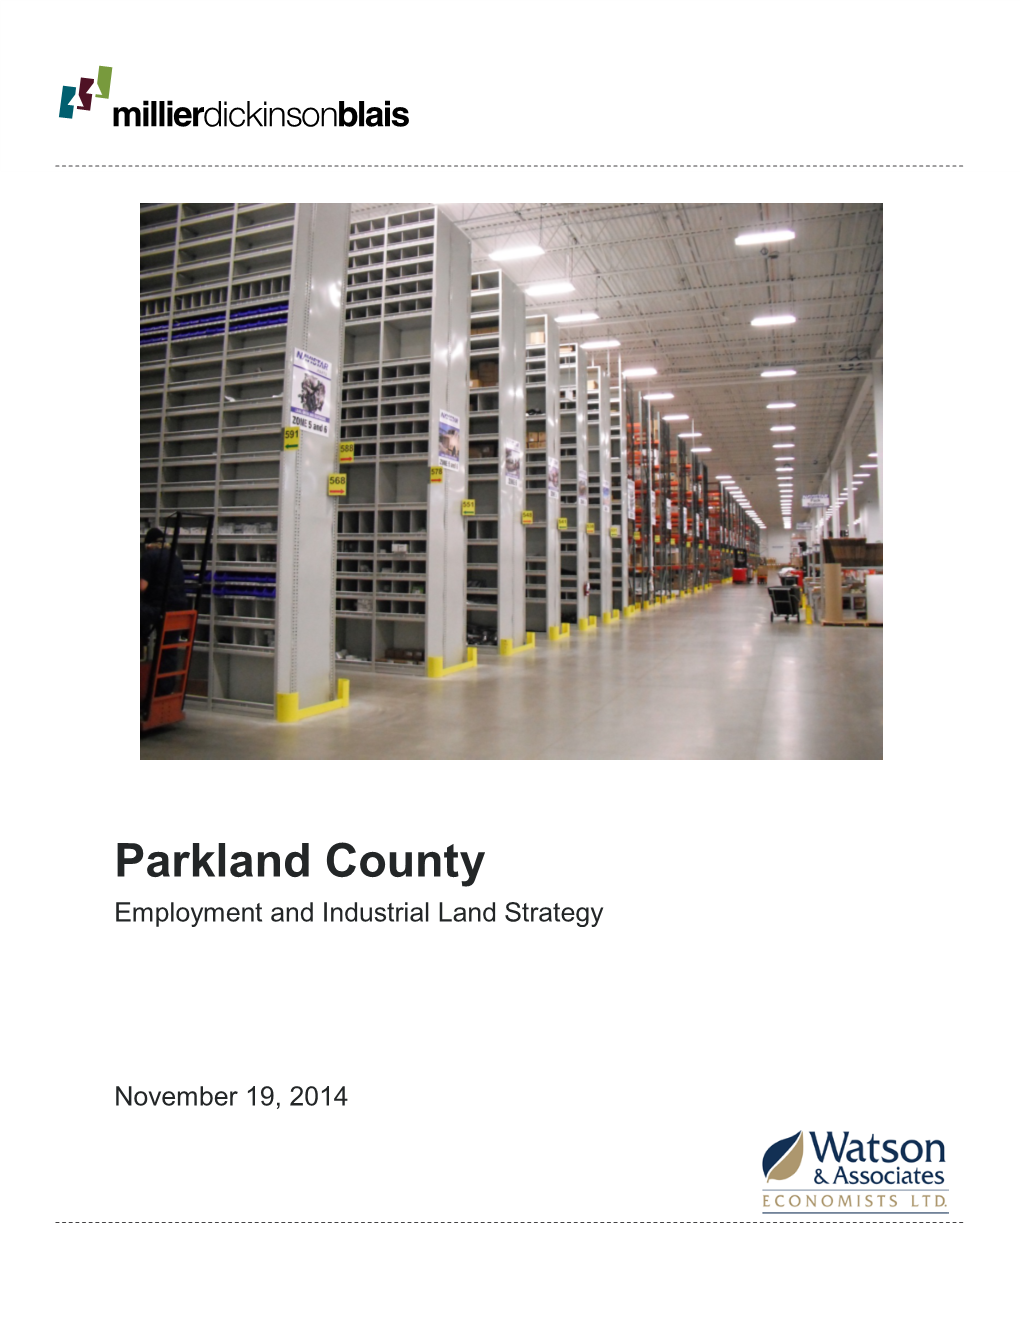 Employment and Industrial Lands Study